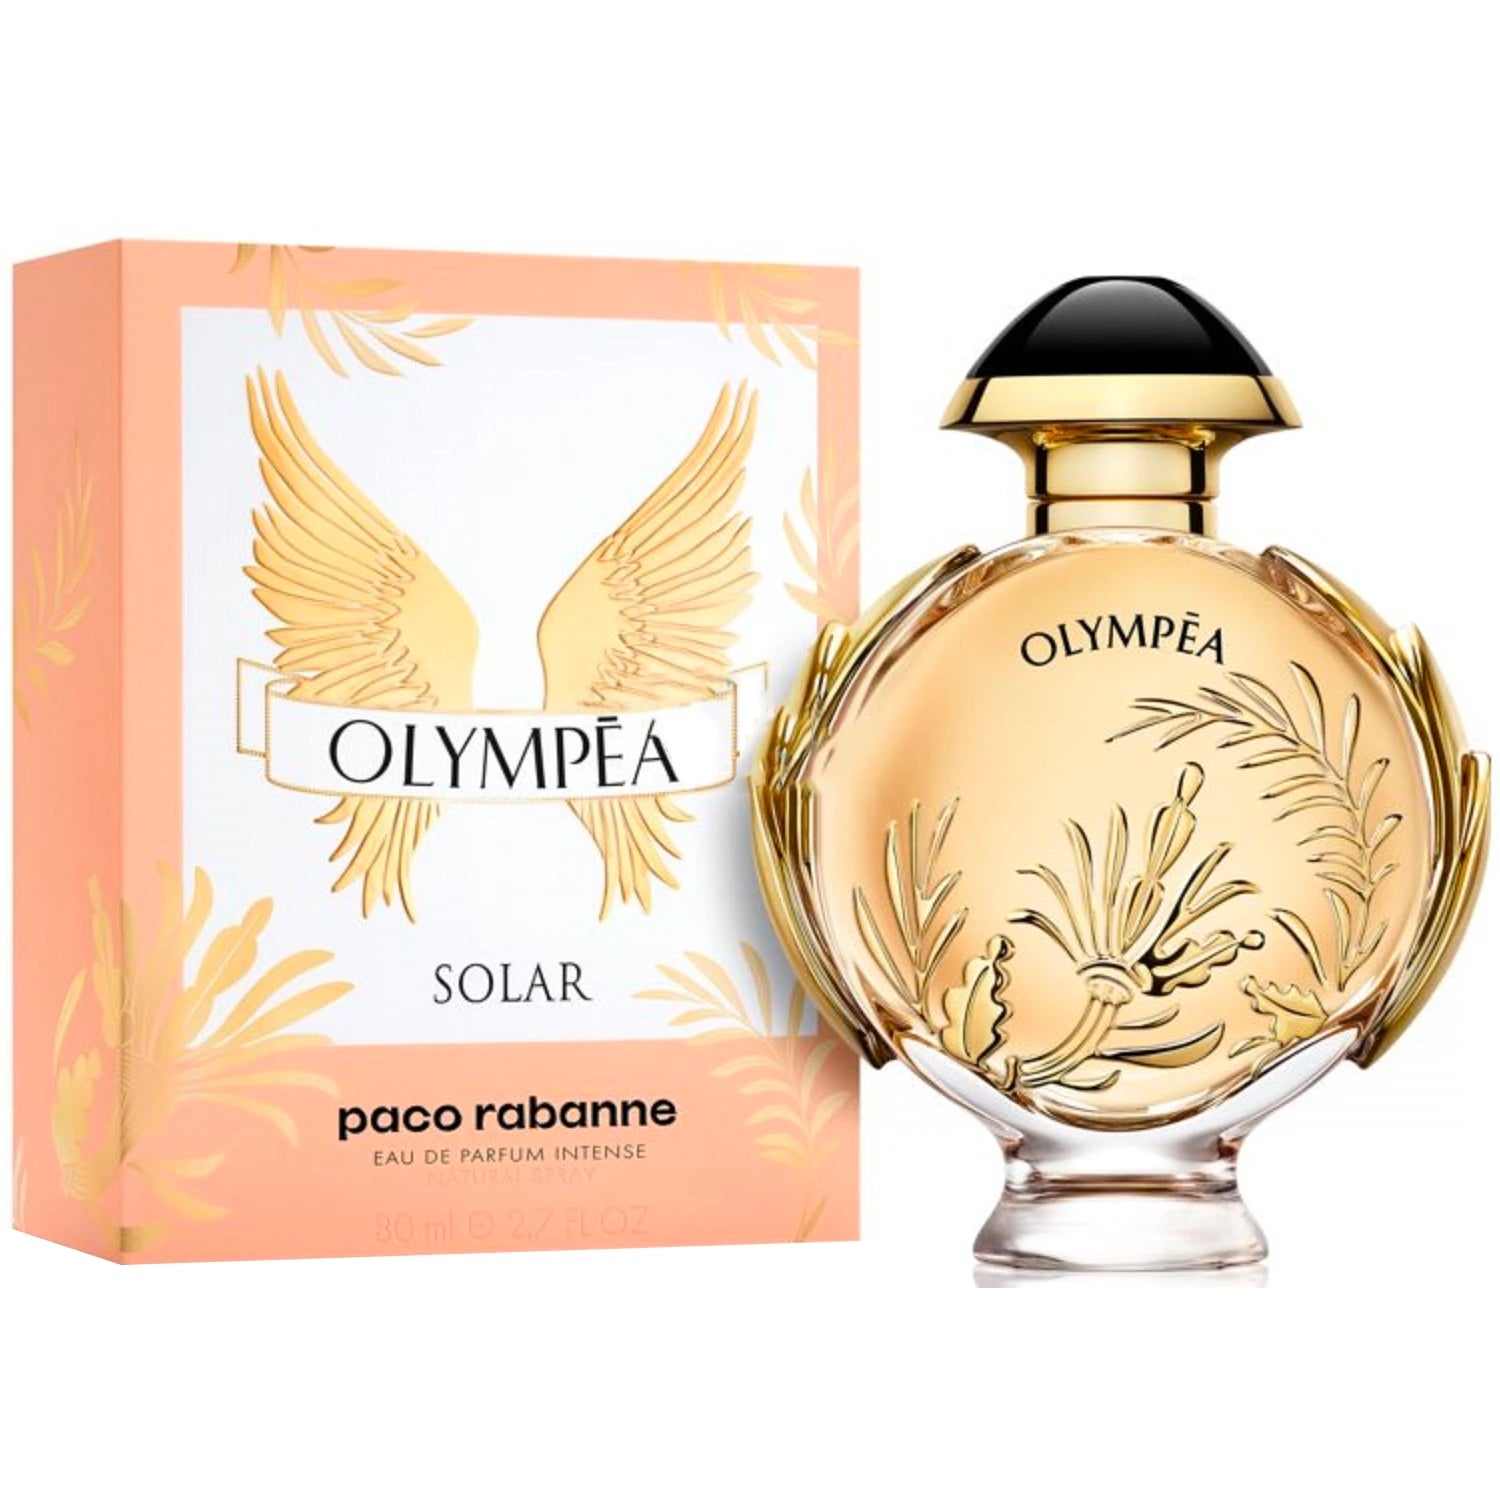 <meta charset="utf-8"><b data-mce-fragment="1">Olympéa Solar</b><span data-mce-fragment="1"> by </span><b data-mce-fragment="1">Paco Rabanne</b><span data-mce-fragment="1"> is a Citrus Aromatic fragrance for women. This is a new fragrance. </span><b data-mce-fragment="1">Olympéa Solar</b><span data-mce-fragment="1"> was launched in 2022. Top notes are Orange Peel, Mandarin Orange and Orange Blossom; middle notes are Tiare Flower, Solar notes, White Flowers and Oakmoss; base notes are Ylang-Ylang and Benzoin.</span>